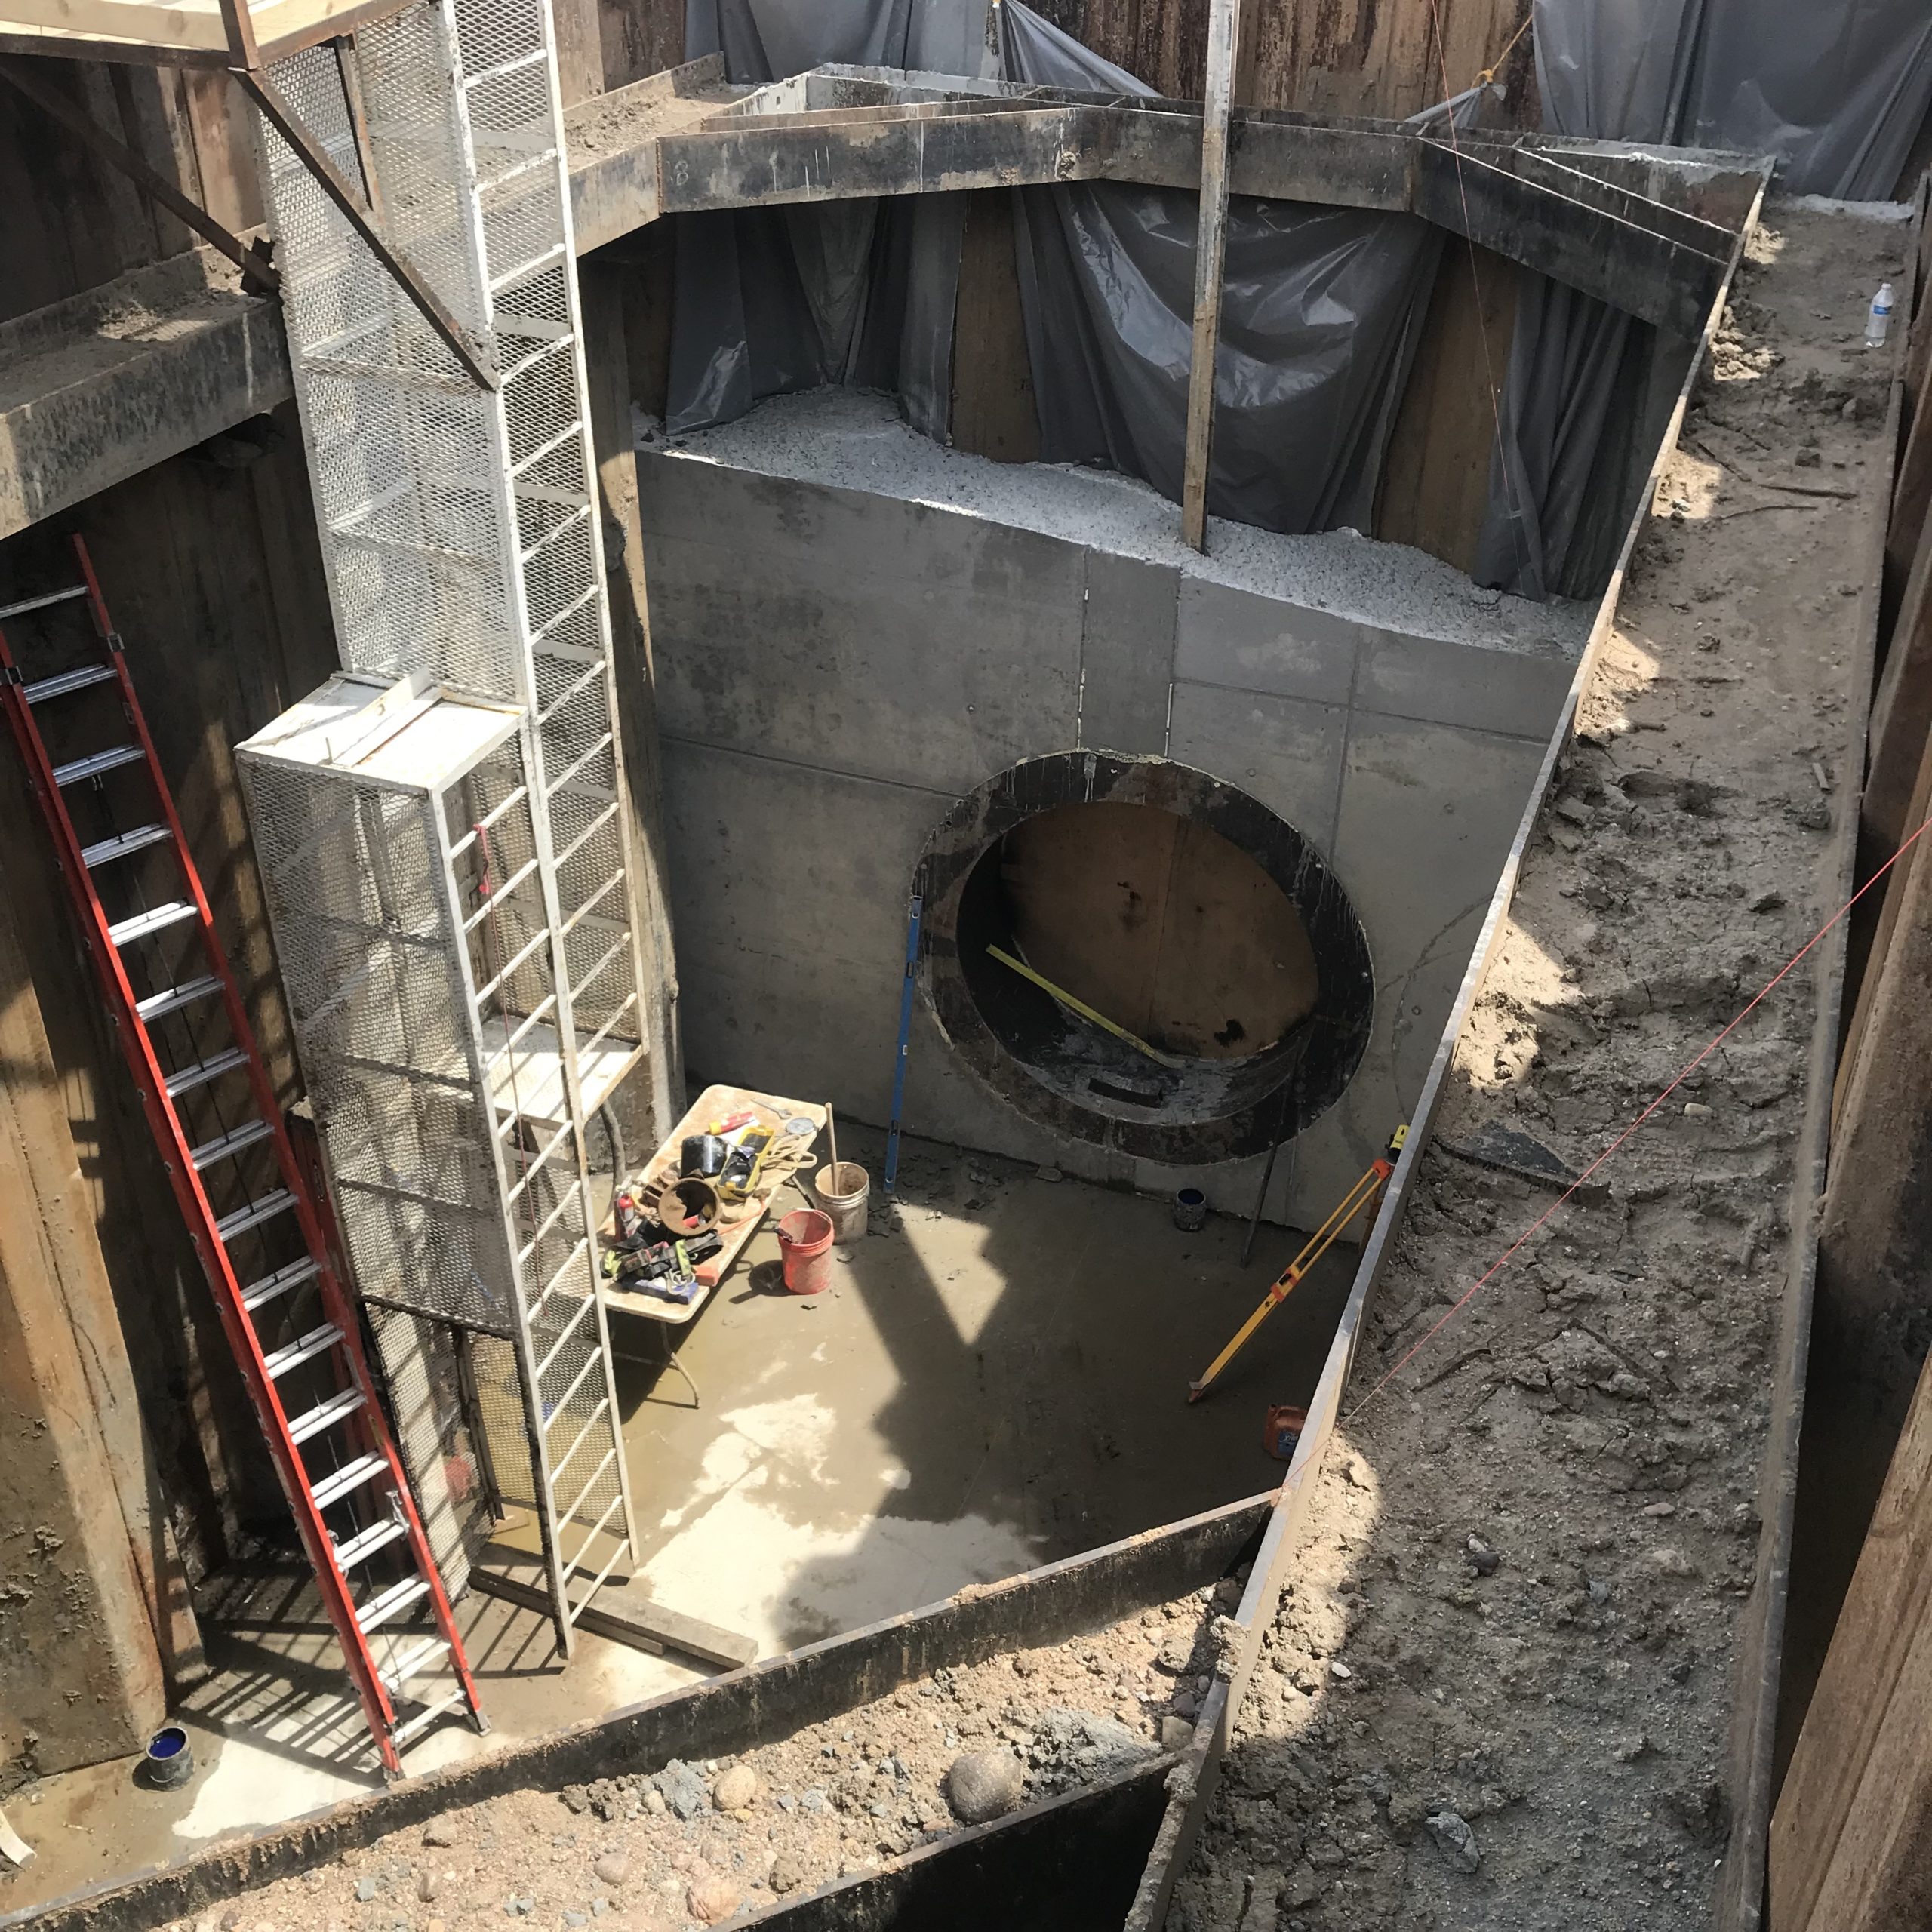 A large pit in the ground with ladders, buckets and other equipment where a drilling and tunneling machine will begin its work.